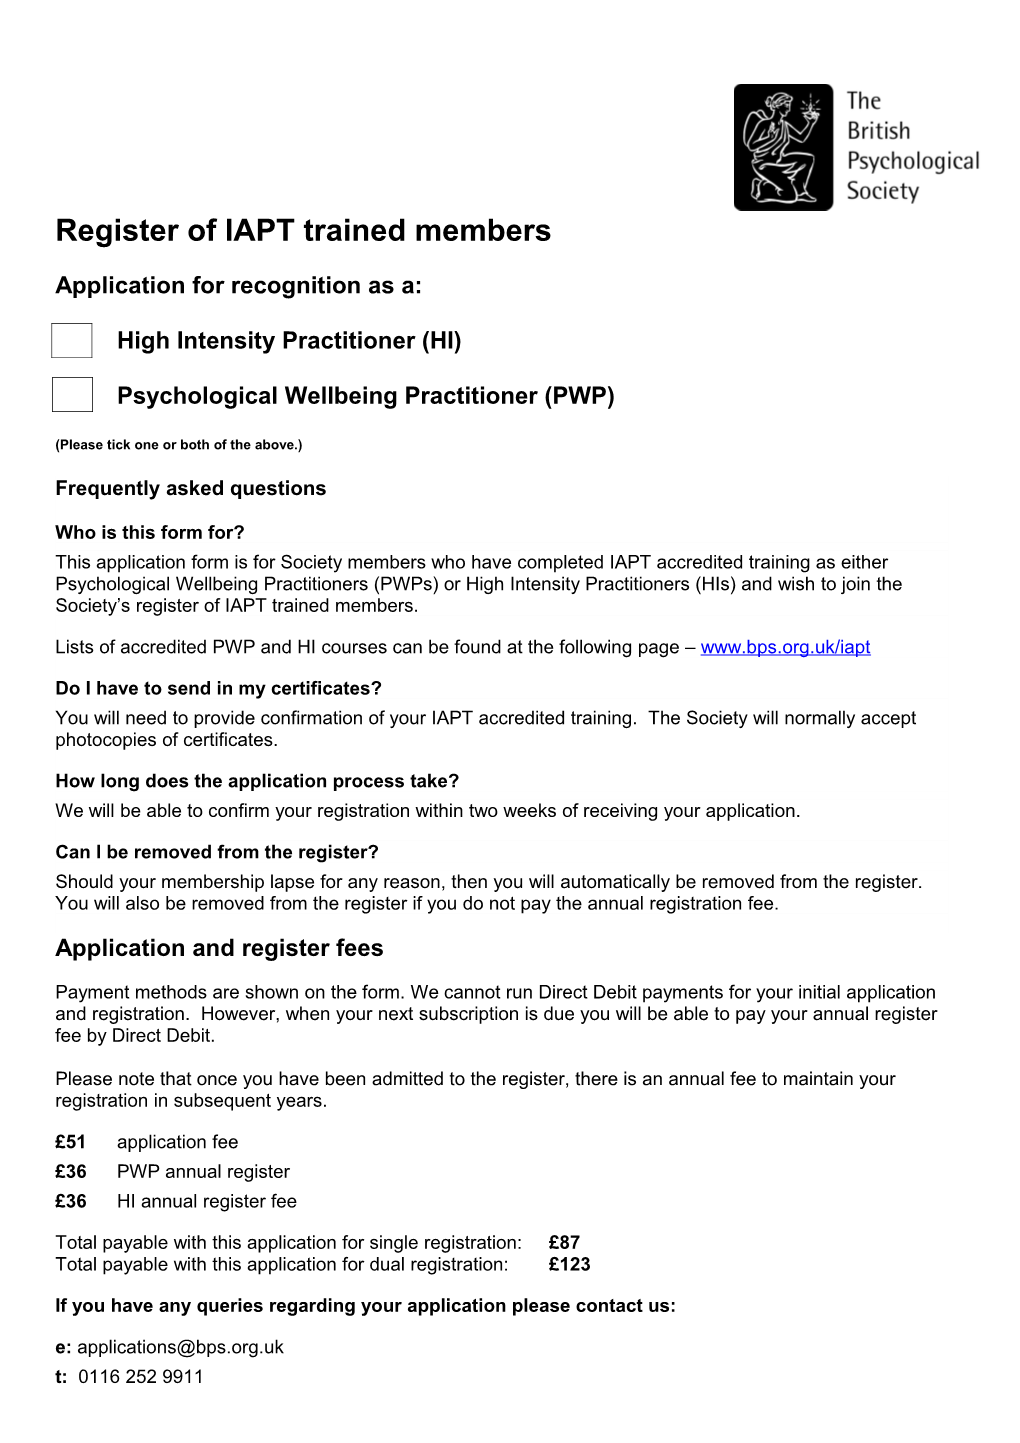 Register of IAPT Trained Members